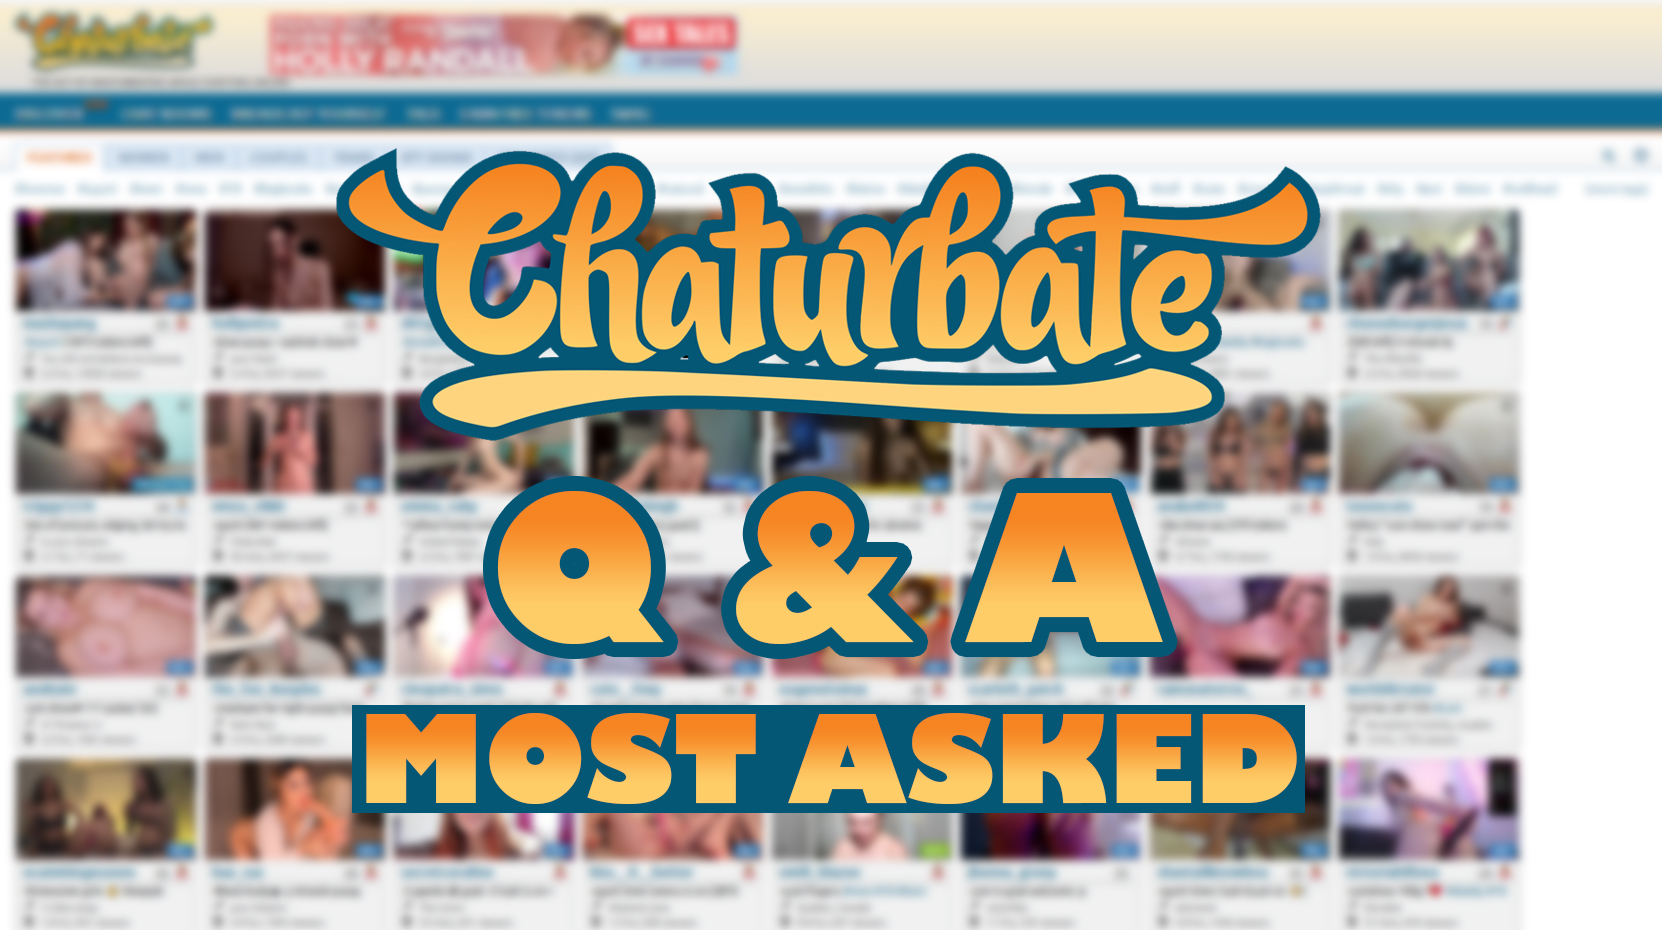 How much are chaturbate tokens